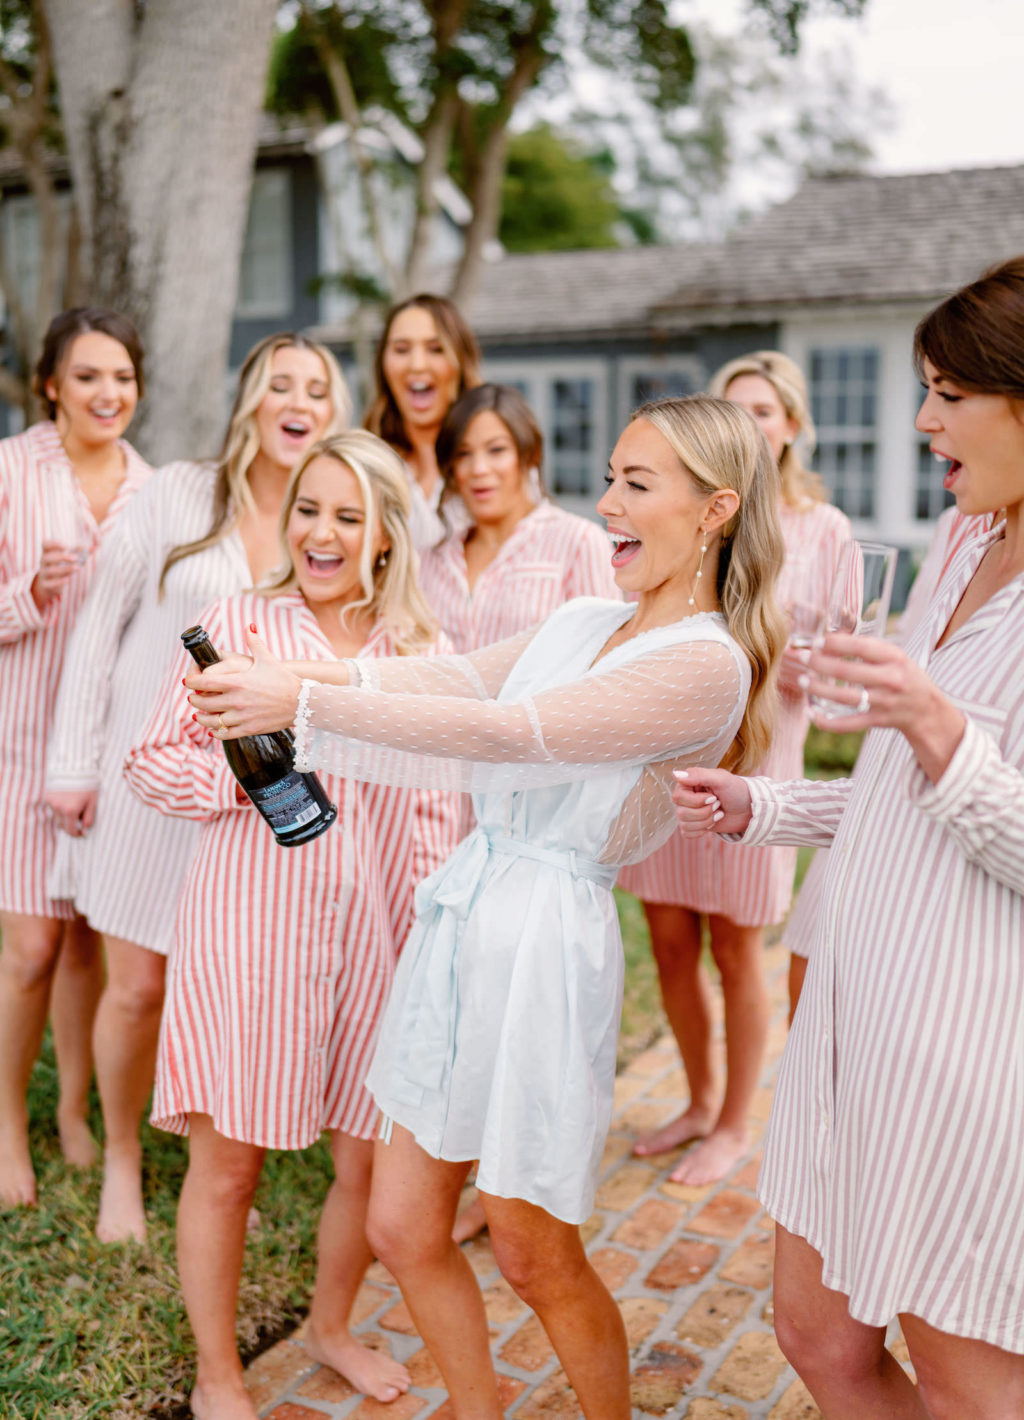 Elegant Bride in Light Blue with Illusion Sleeves Robe Getting Wedding Ready with Bridesmaids in Pinstripe Pajamas Popping Bottle of Champagne